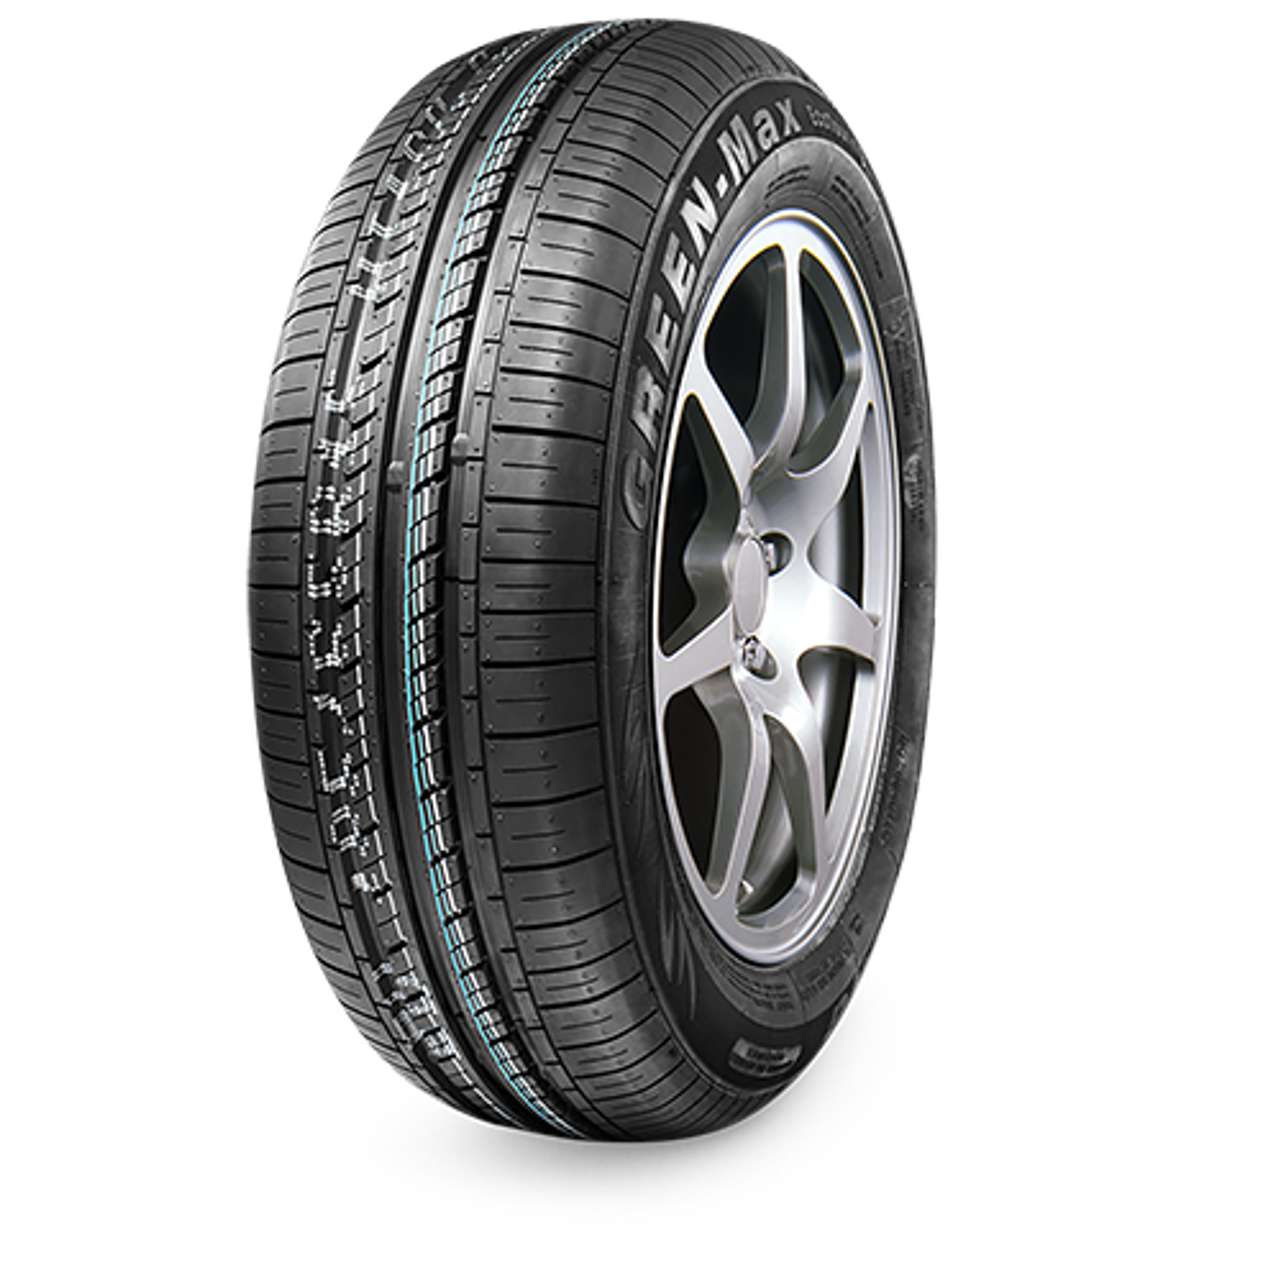 LINGLONG GREEN-MAX ECOTOURING 165/65R14 79T BSW